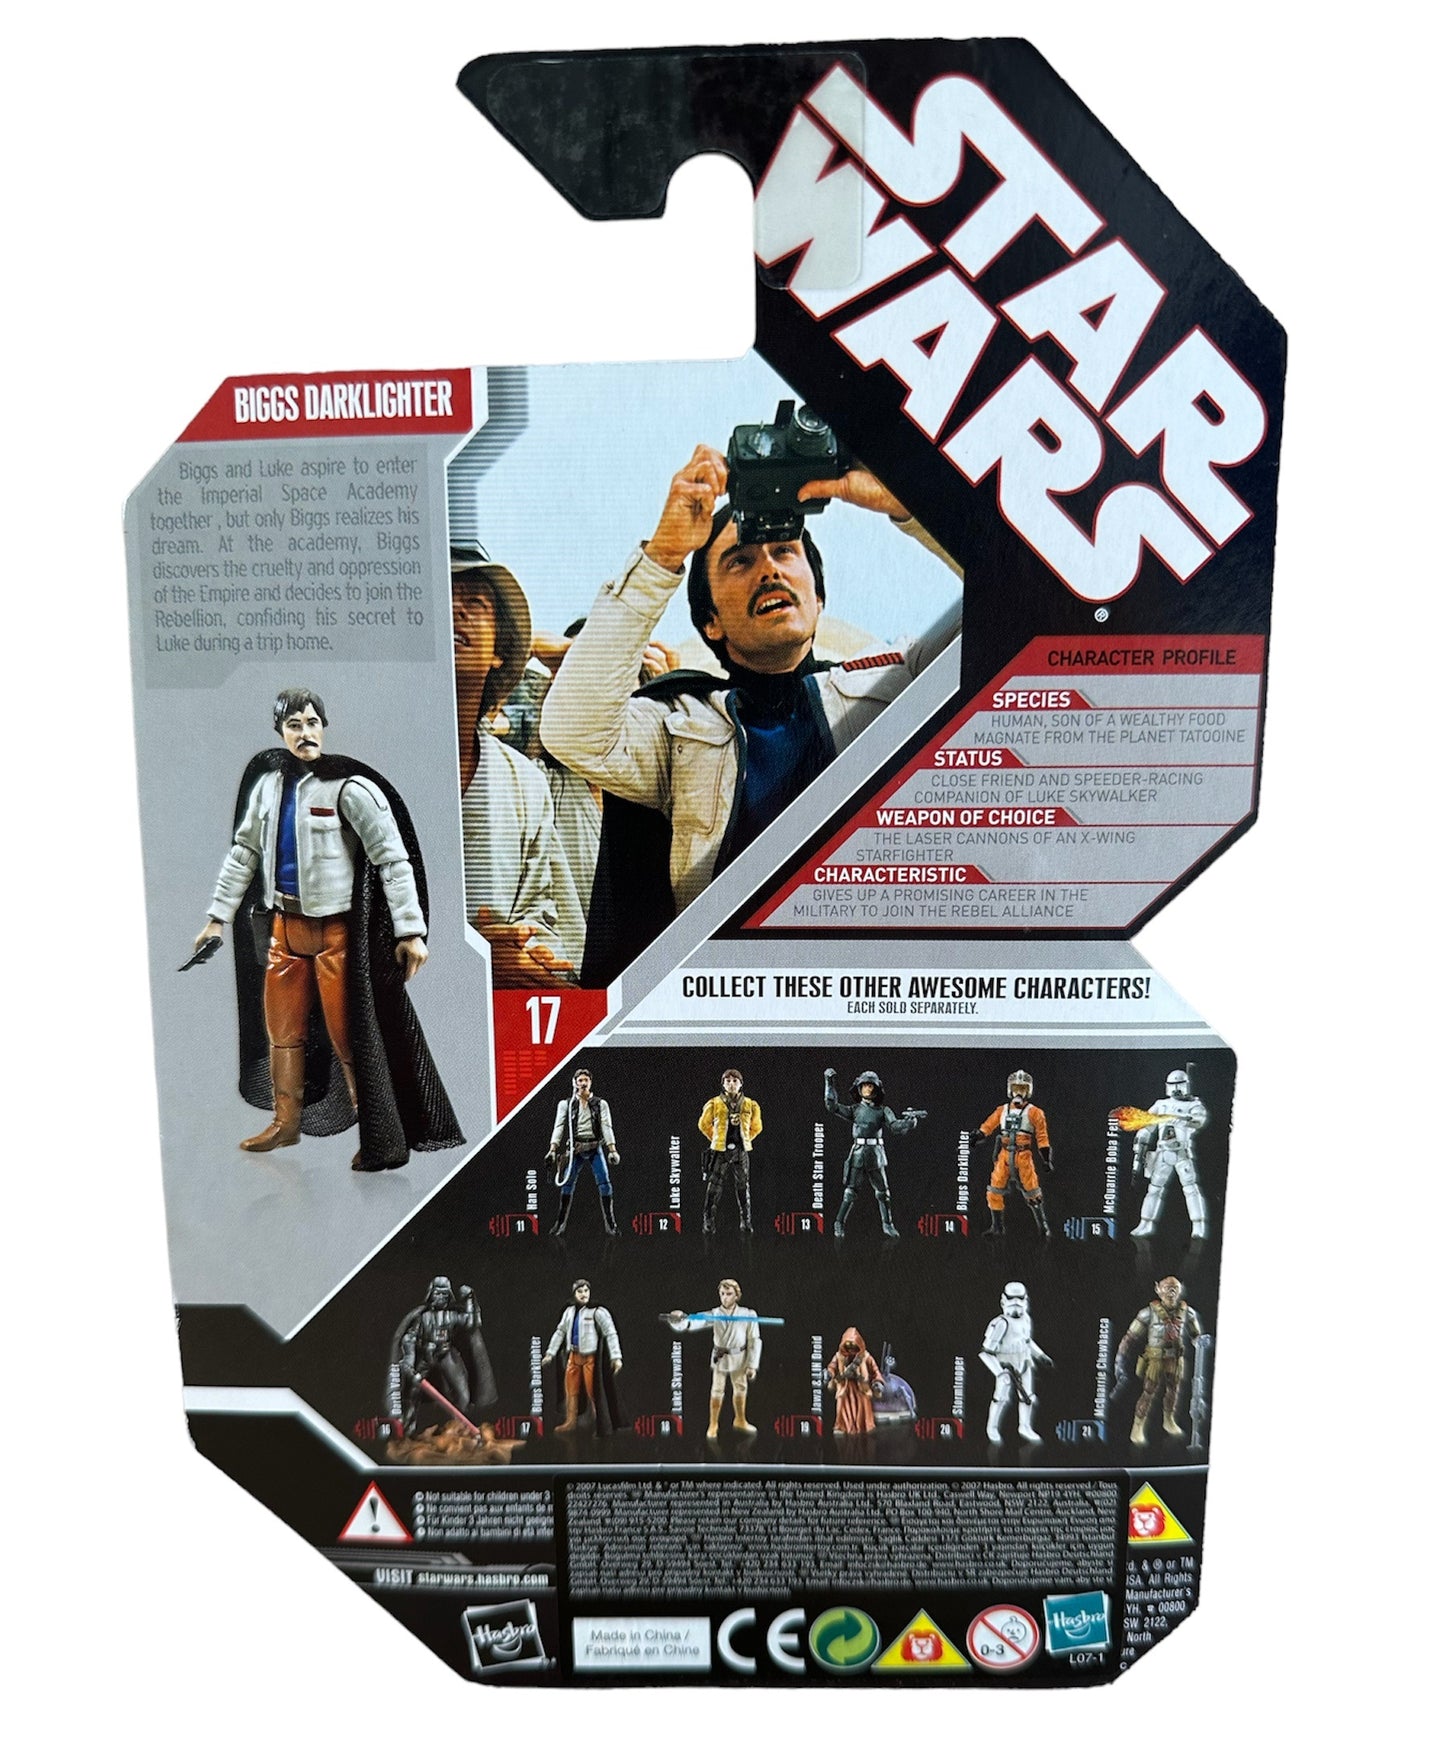 Vintage 2007 Star Wars Saga 30th Anniversary A New Hope Biggs Darklighter Action Figure With Exclusive Collector Coin - Brand New Factory Sealed Shop Stock Room Find